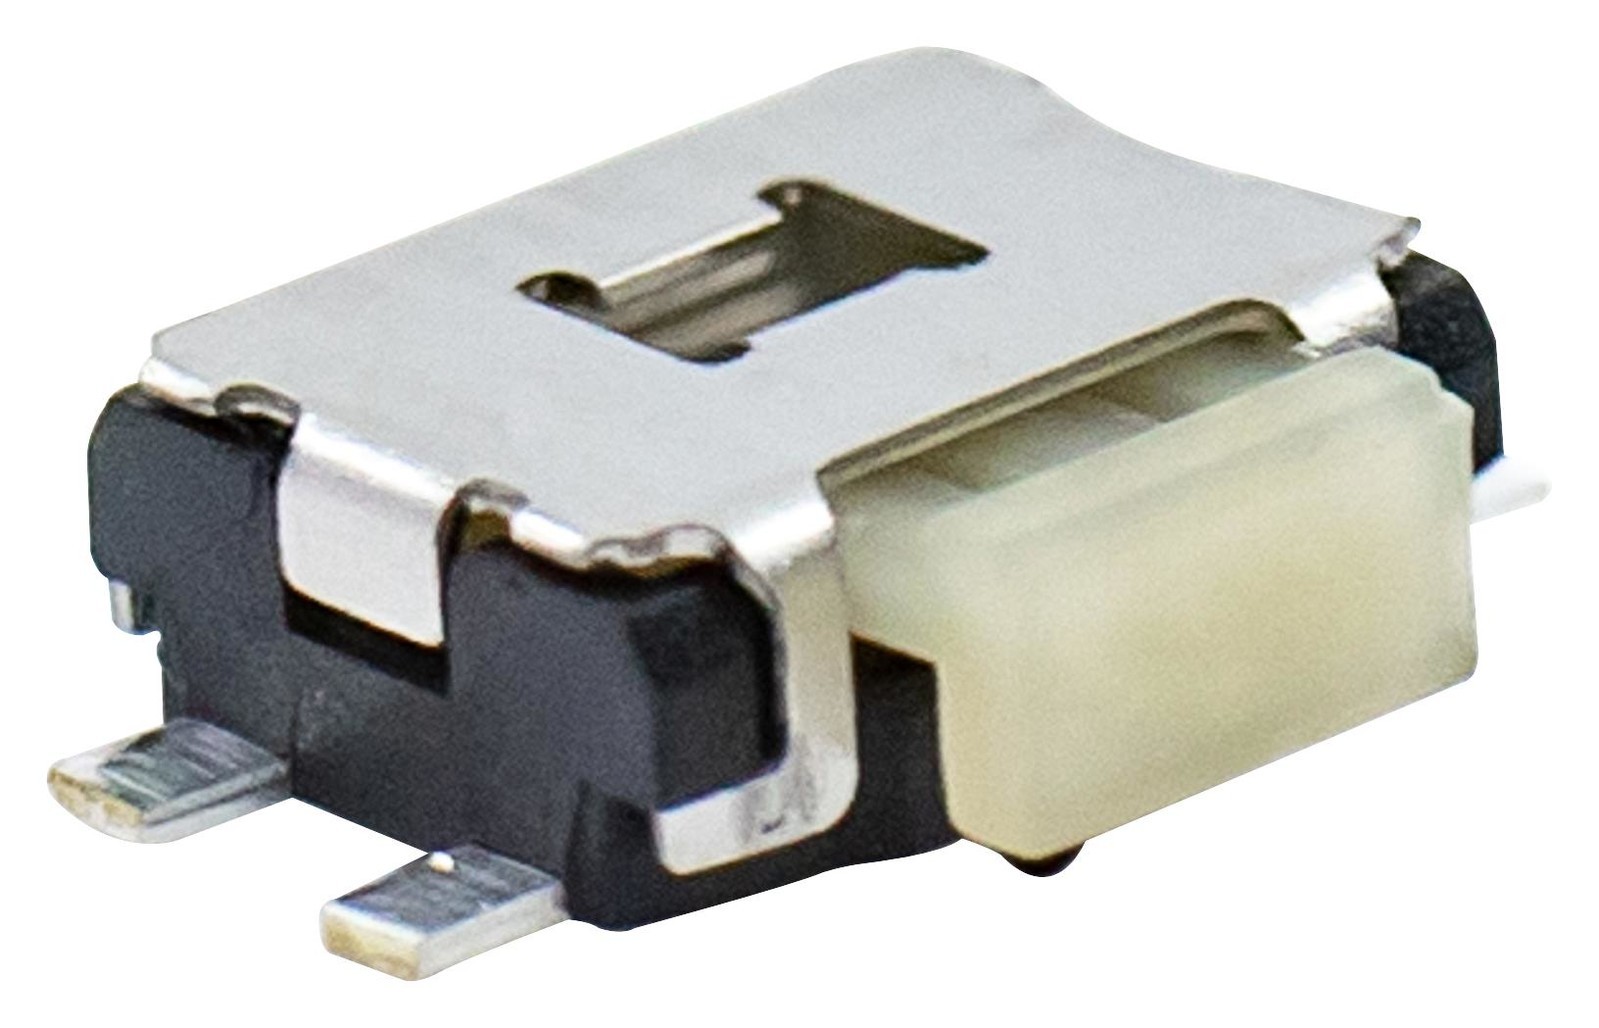 E-Switch Tl1014Bf160Qg Tactile Switch, 0.05A, 12Vdc, 160Gf, Smd